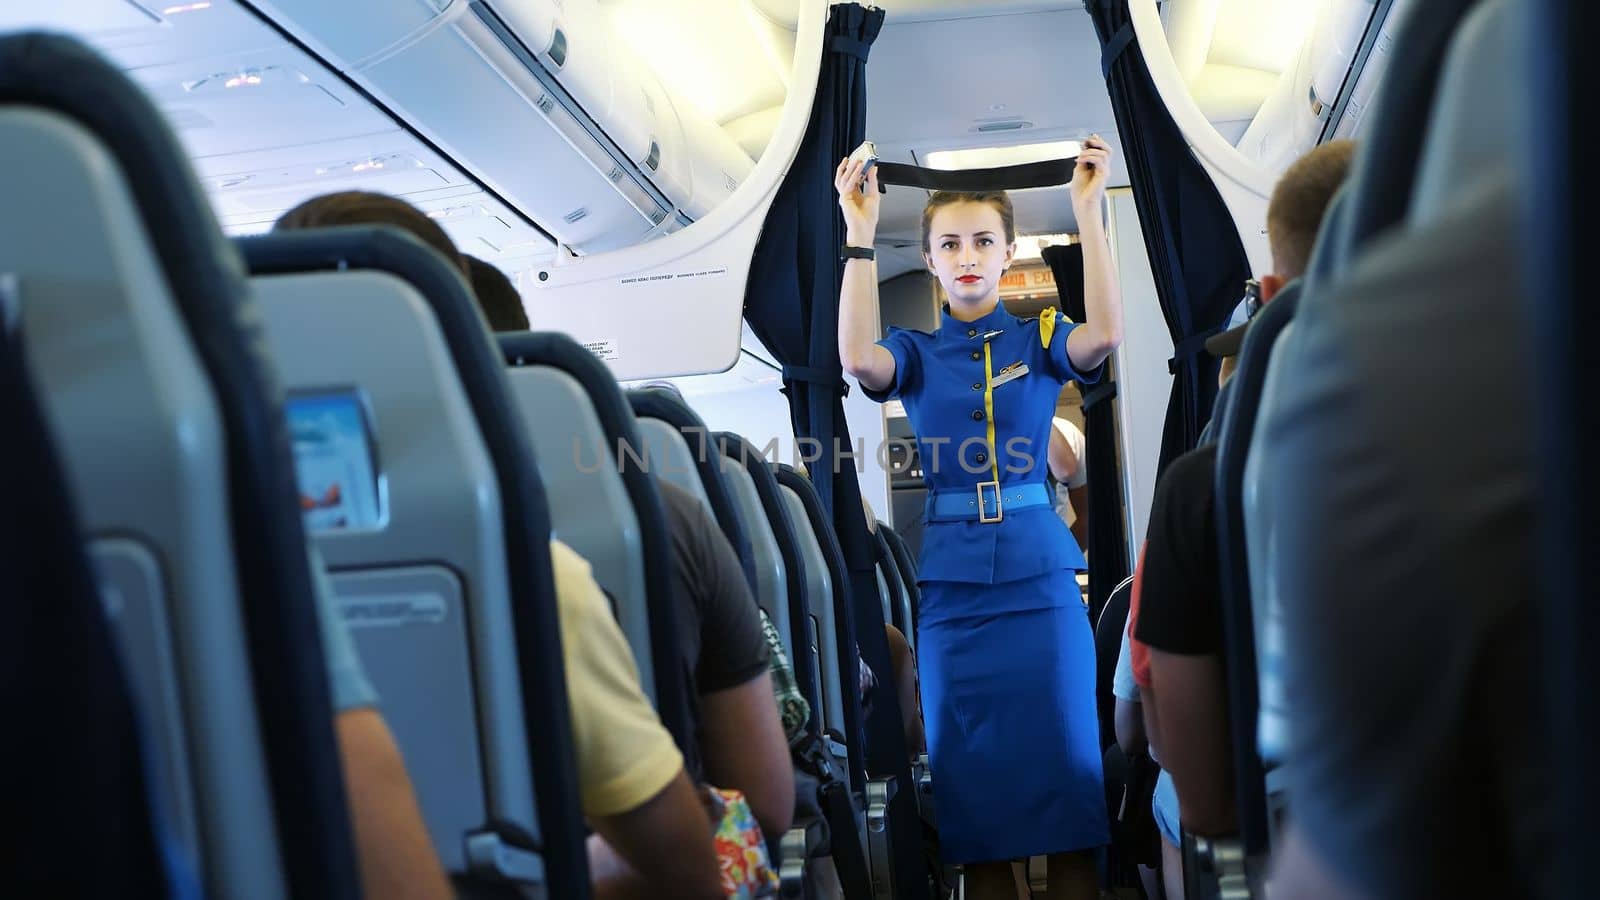 AIRPORT BORYSPIL, UKRAINE - OCTOBER 24, 2018: Ukraine International Airlines. Stewardess in cabin of passenger airplane instructs passengers on safety measures in event of an emergency by djtreneryay